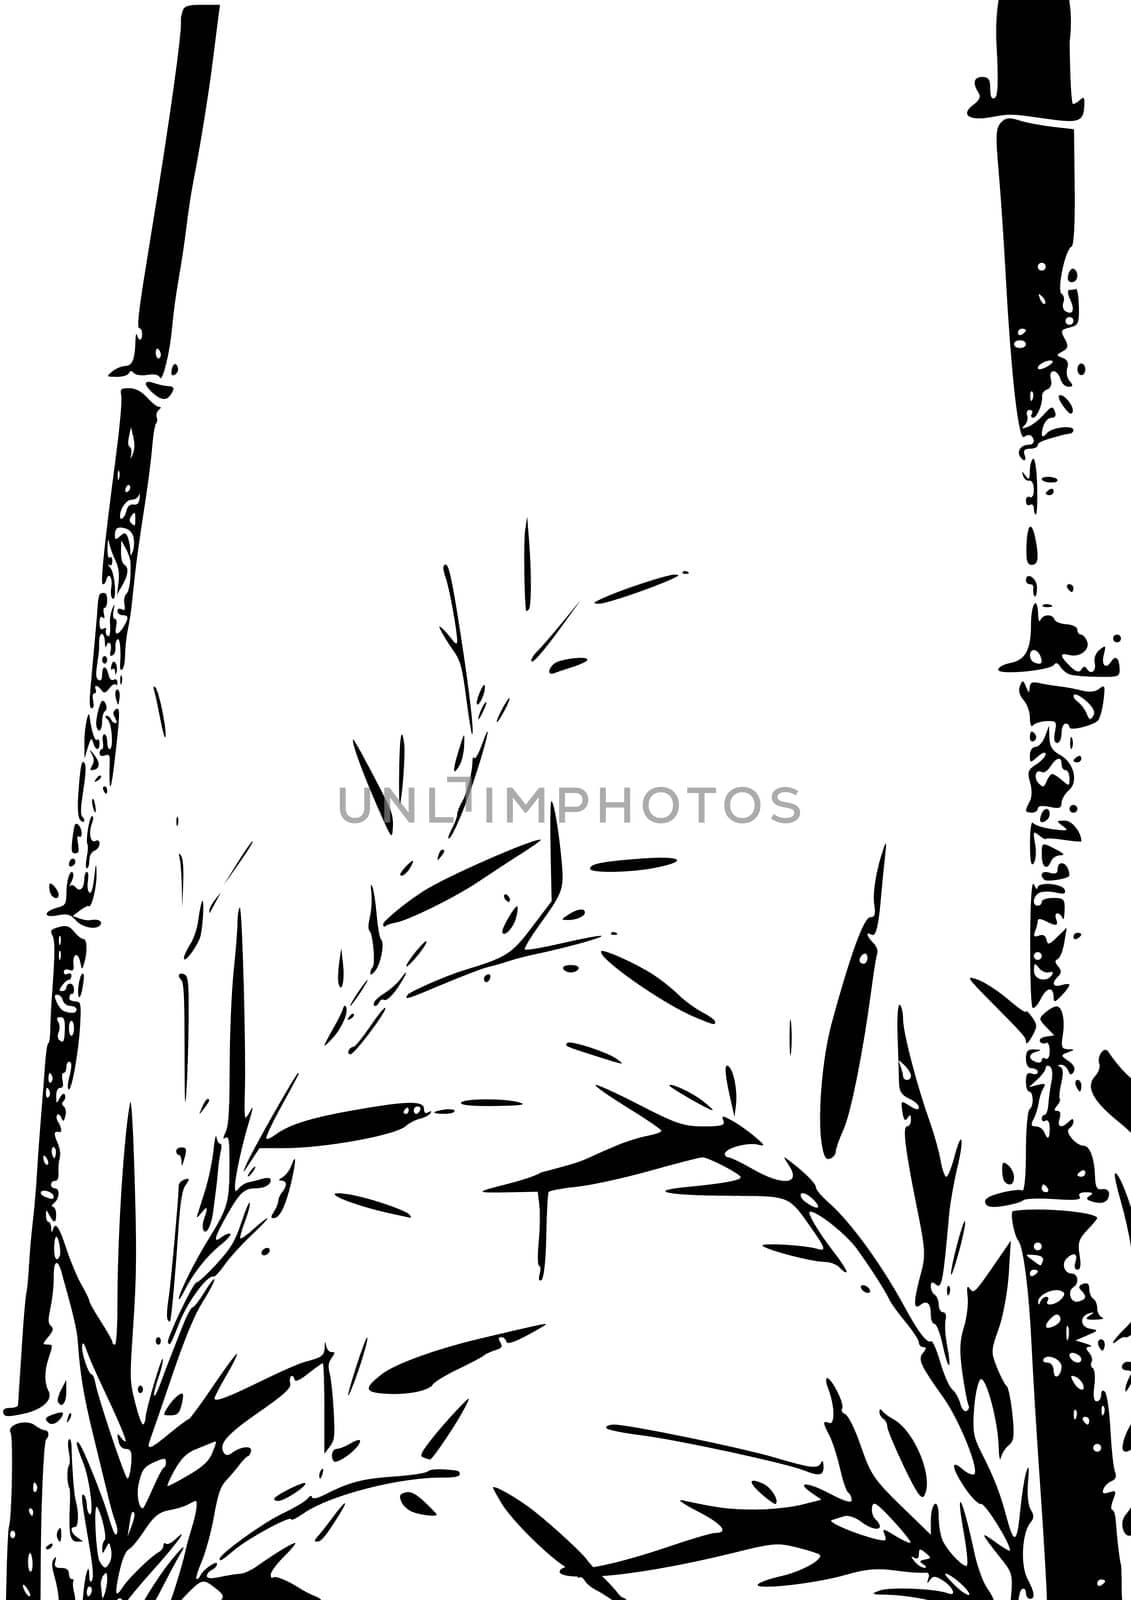 Abstract bamboo silhouette on white background.